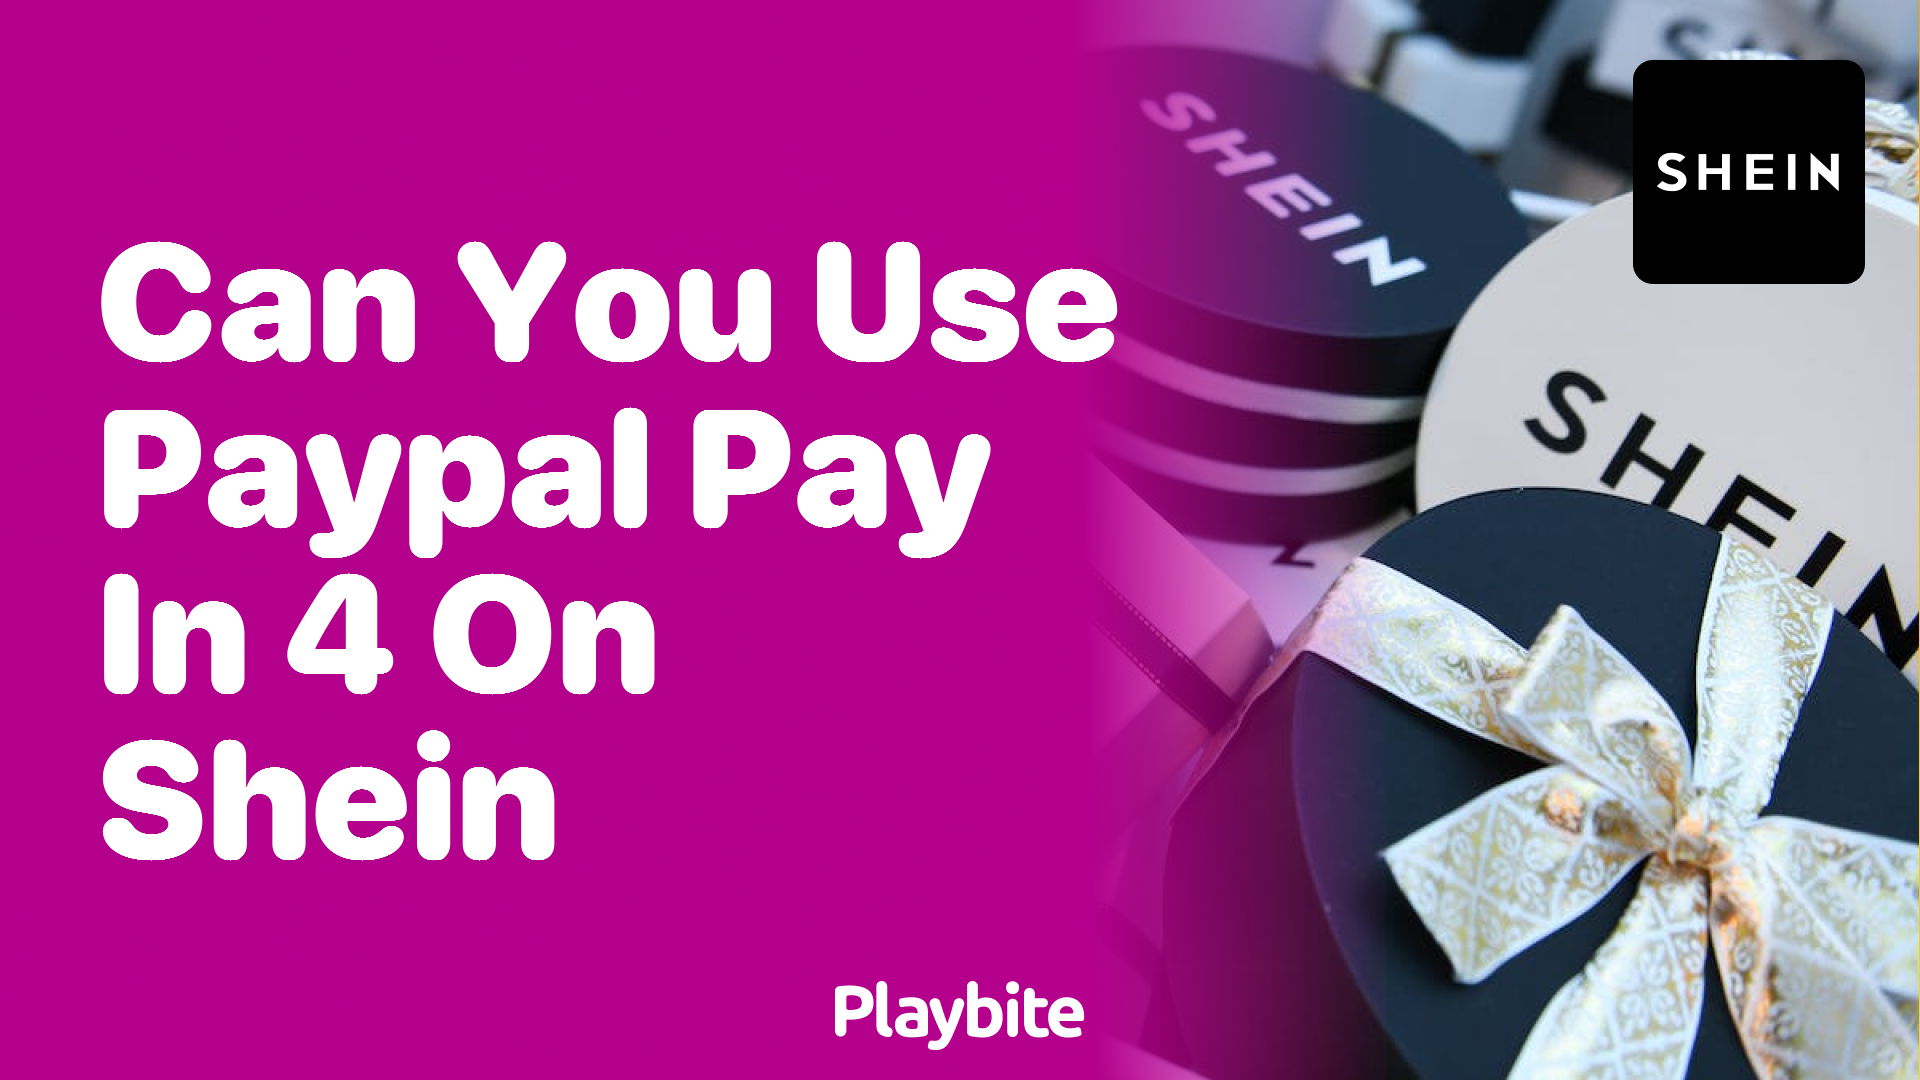 Can You Use PayPal Pay in 4 on SHEIN?